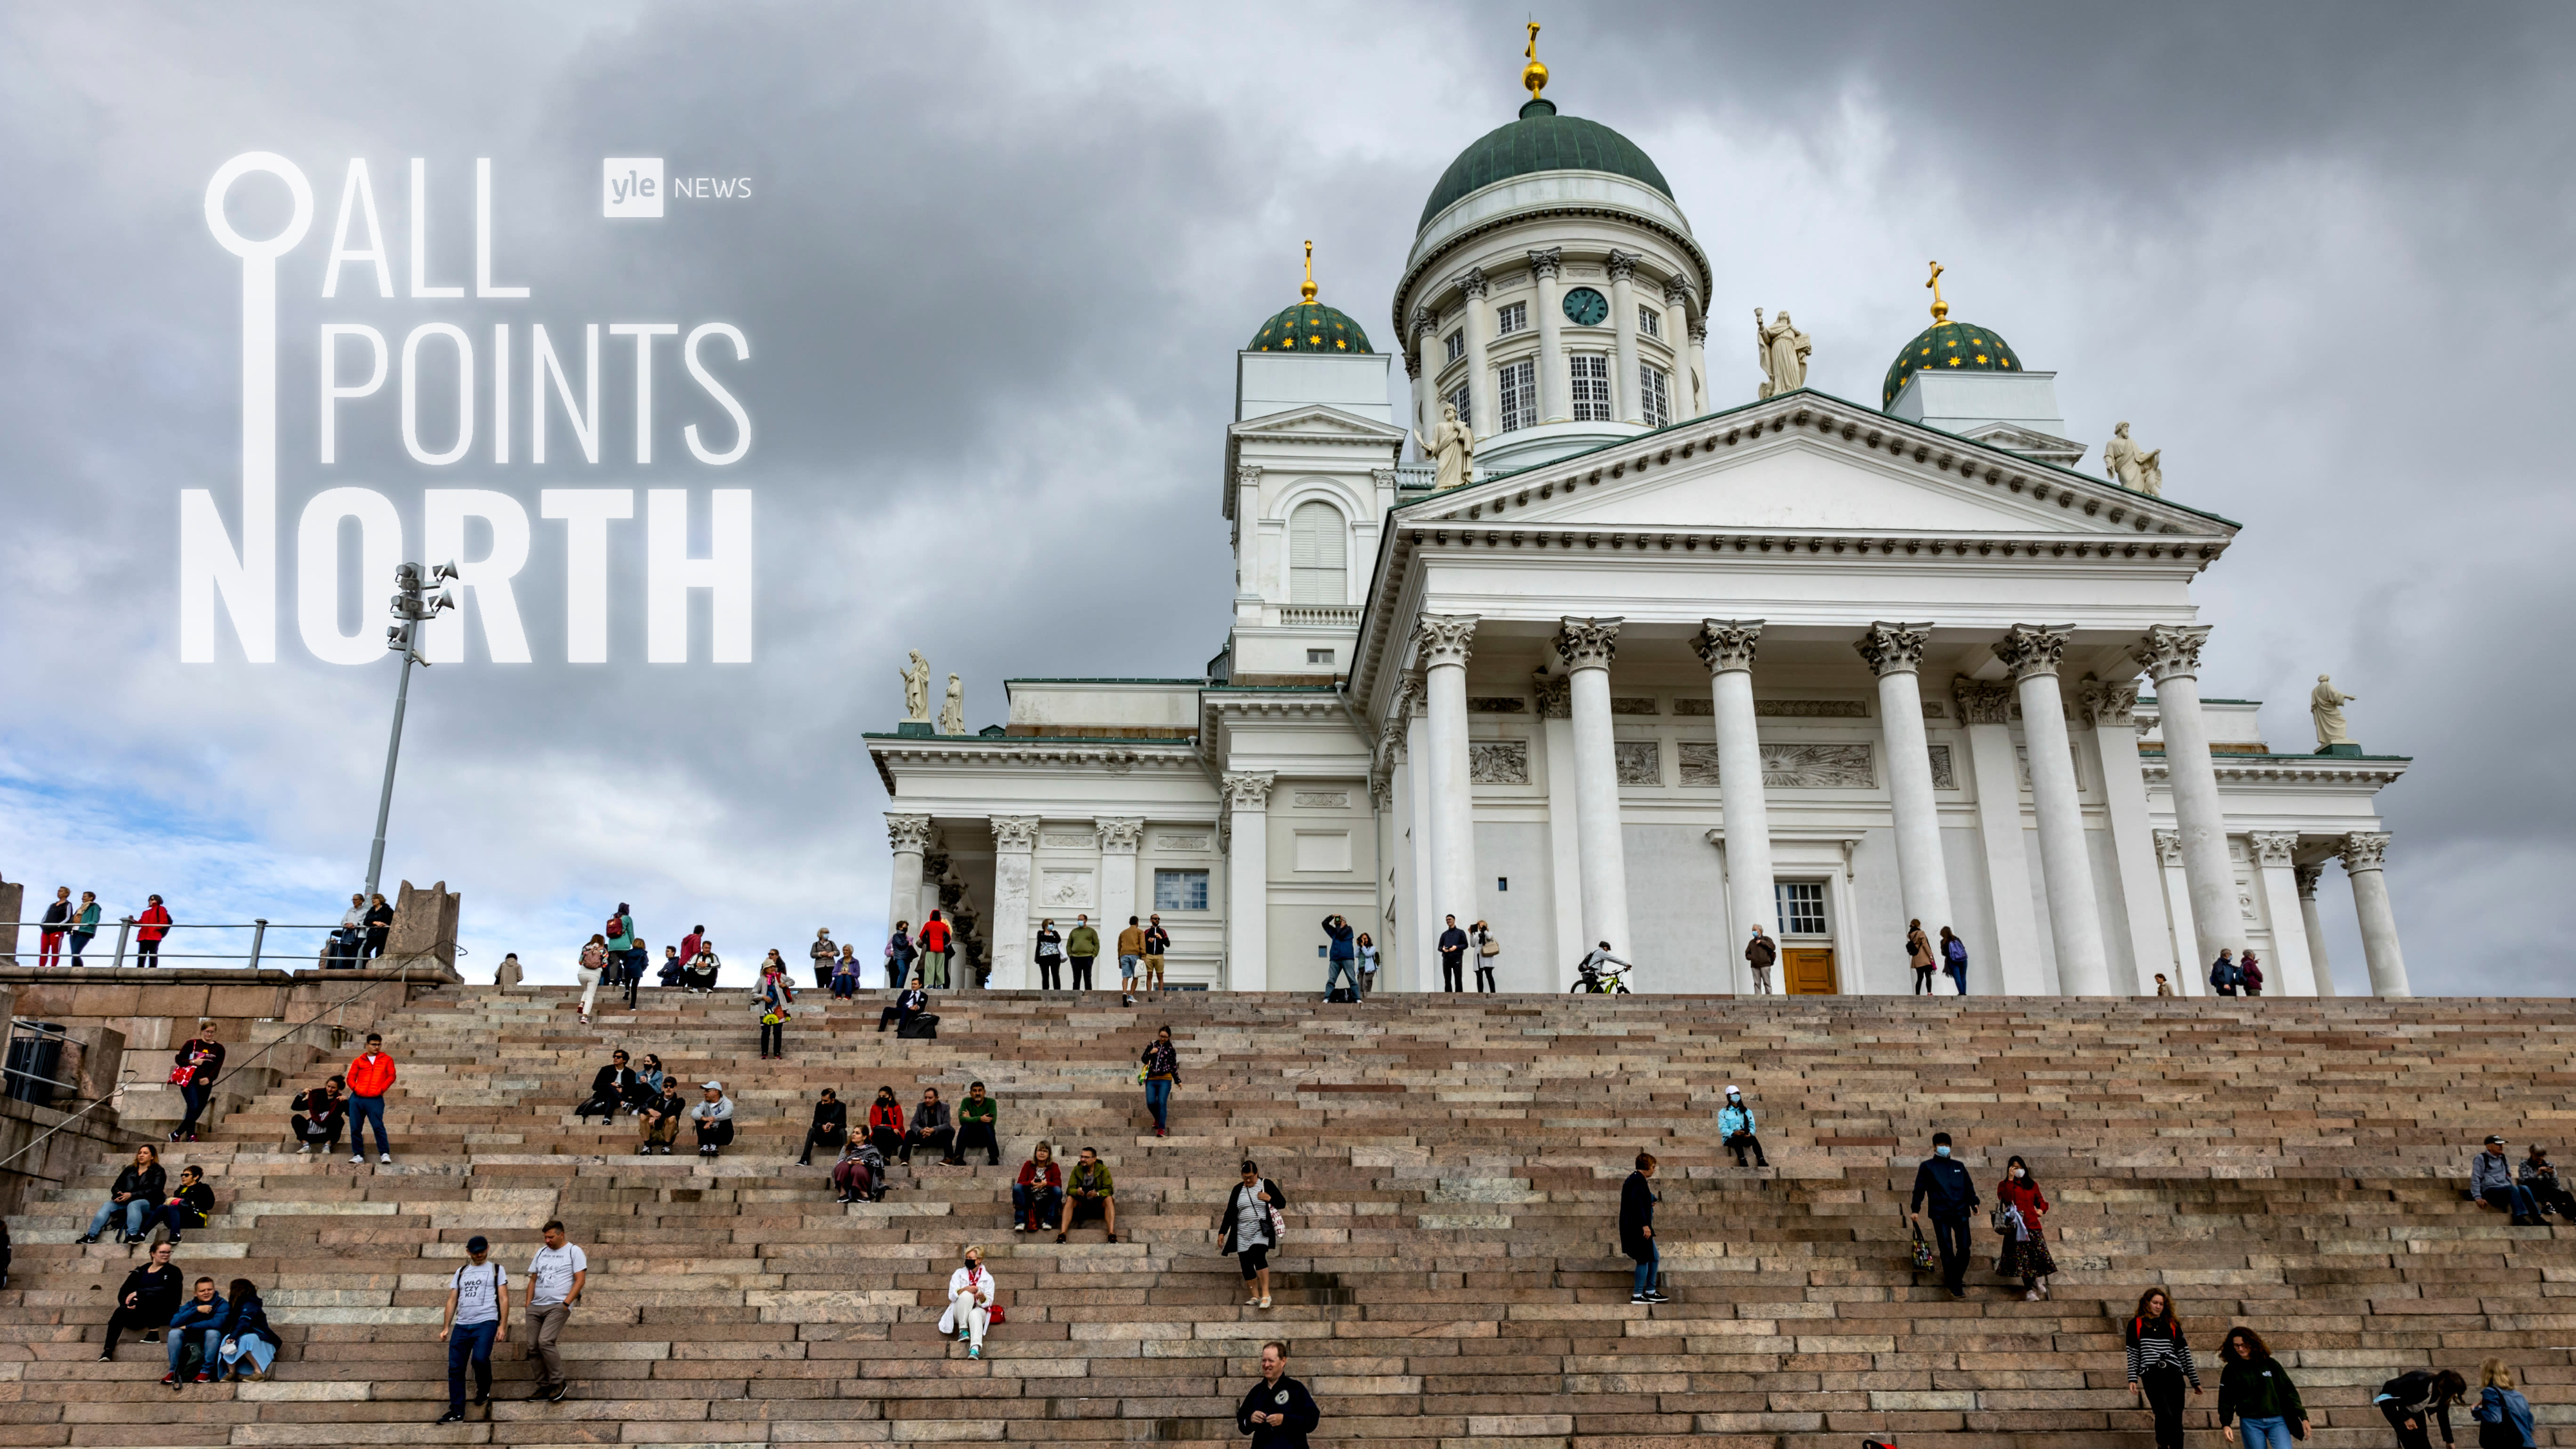 APN podcast: Can Helsinki become an English-speaking city?